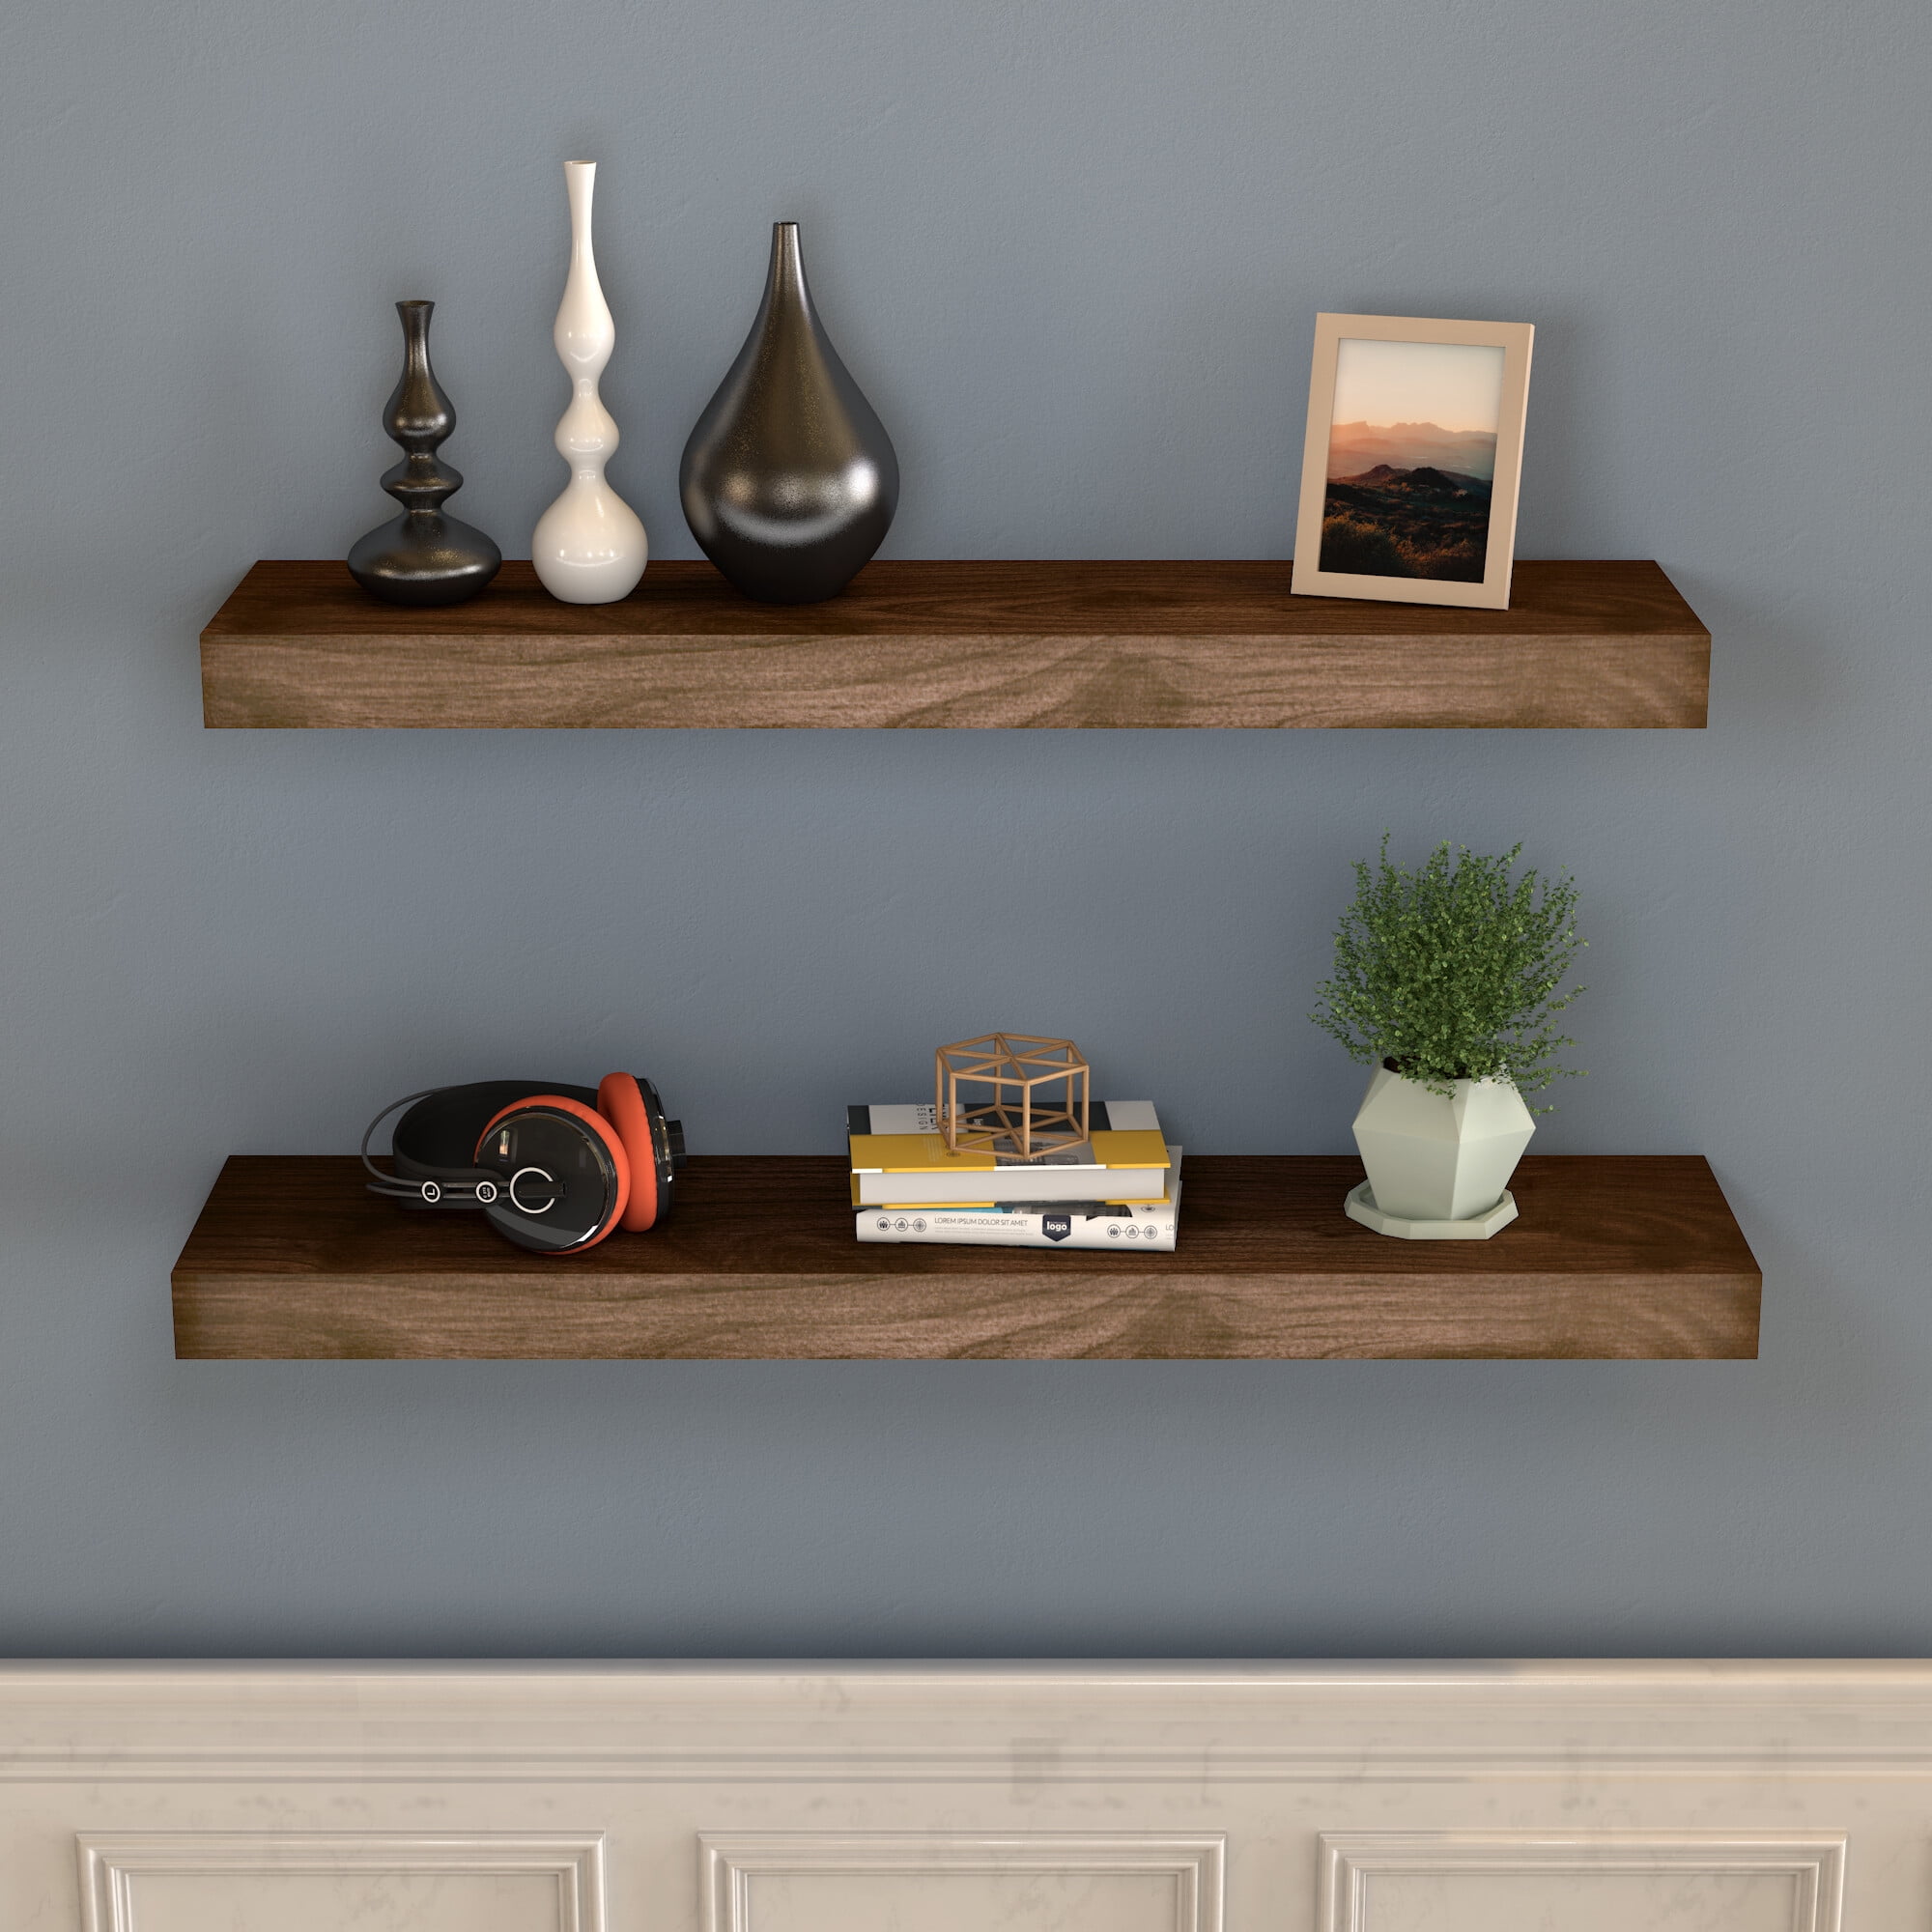 TOLEDO 36x6 Wood Floating Shelves for Wall Storage, Floating Bookshelf,  Long Wall Shelves for Living Room - Set of 2, or 3